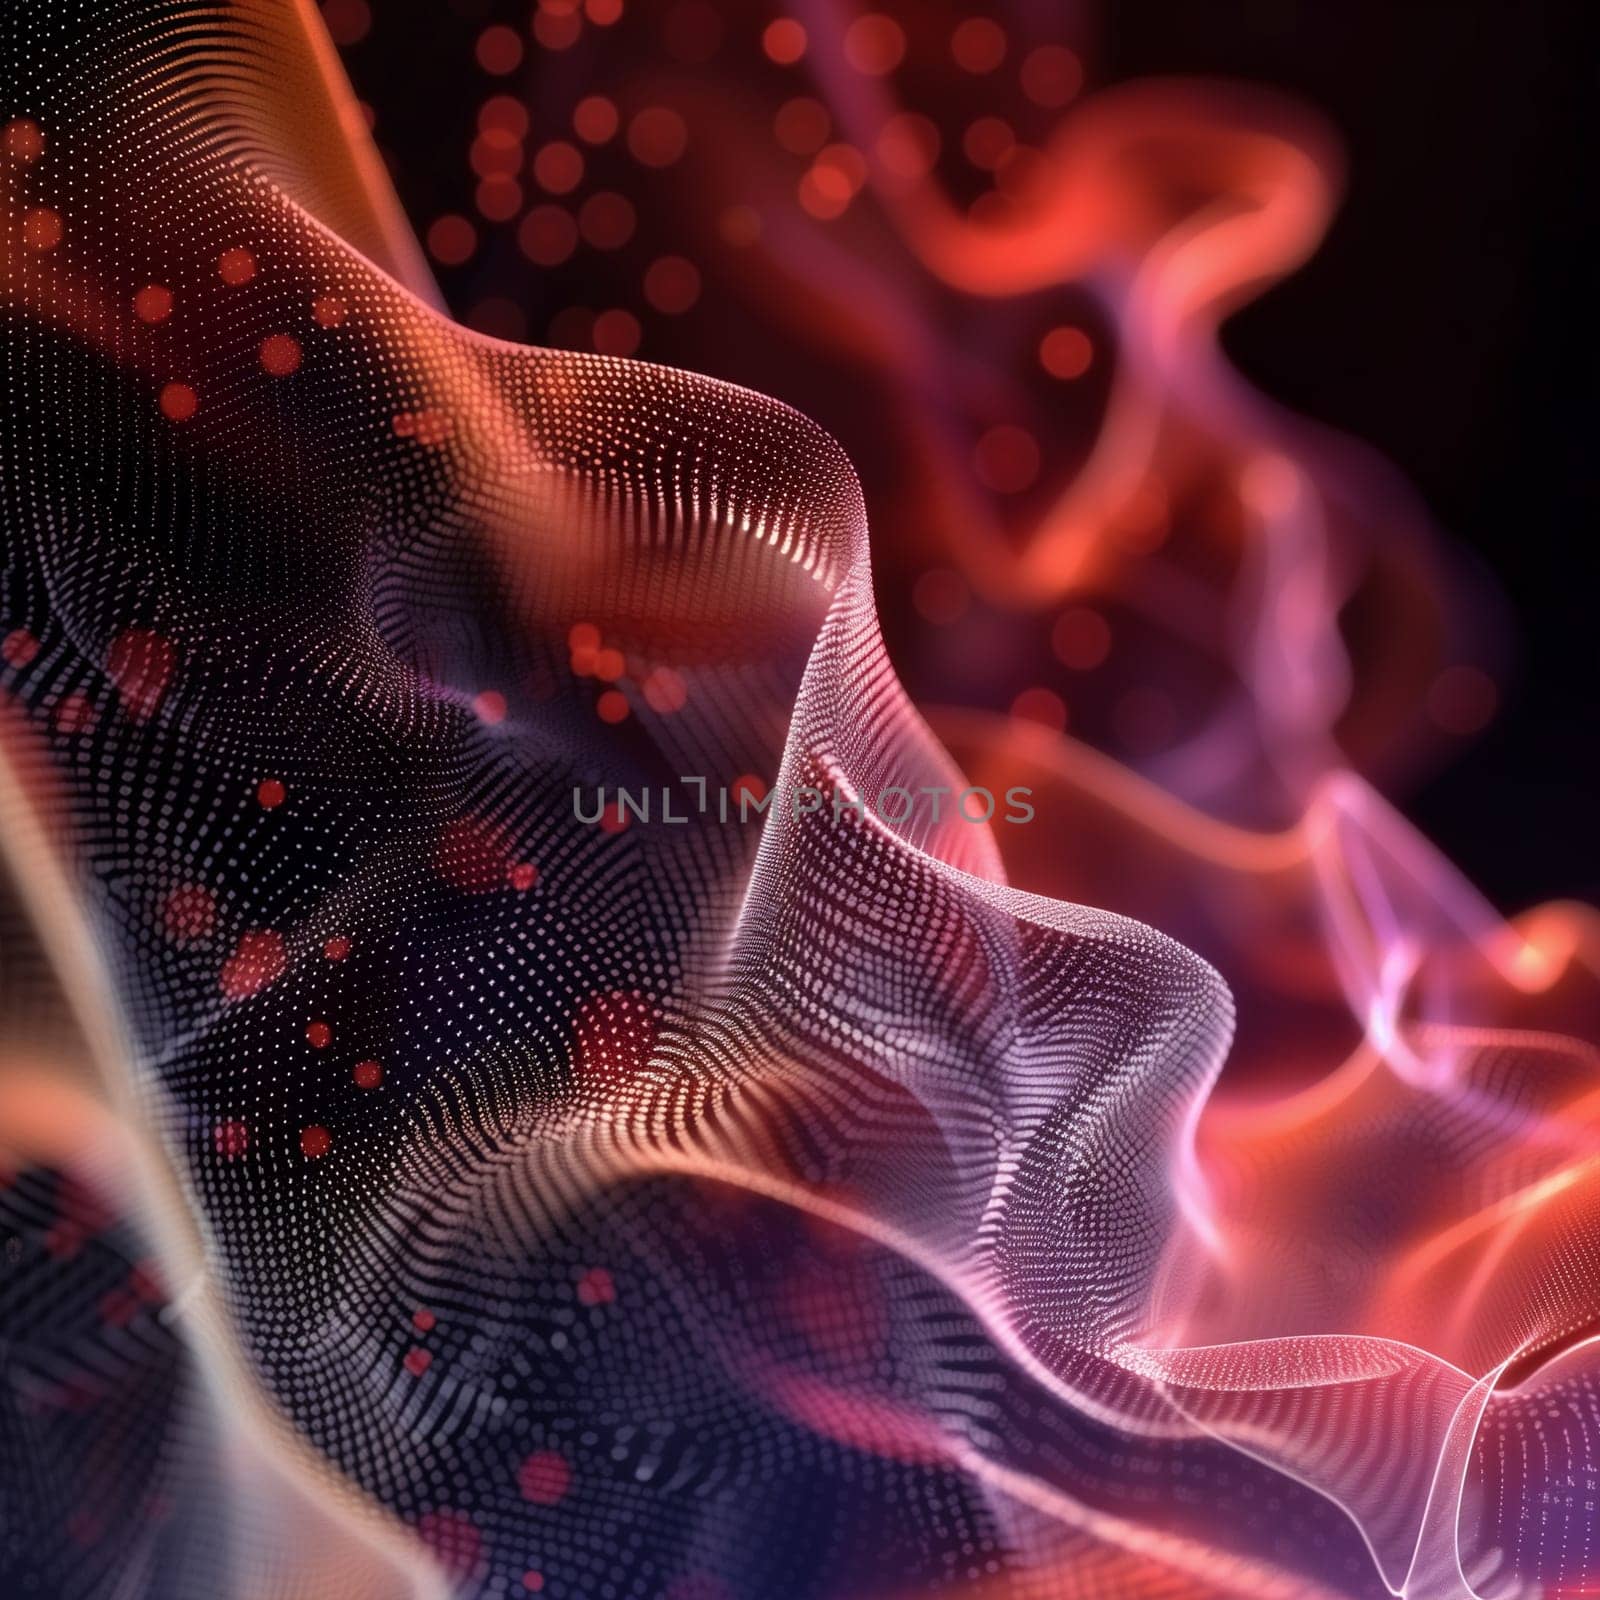 A blurred wave in shades of red and pink, creating a dynamic and abstract image.